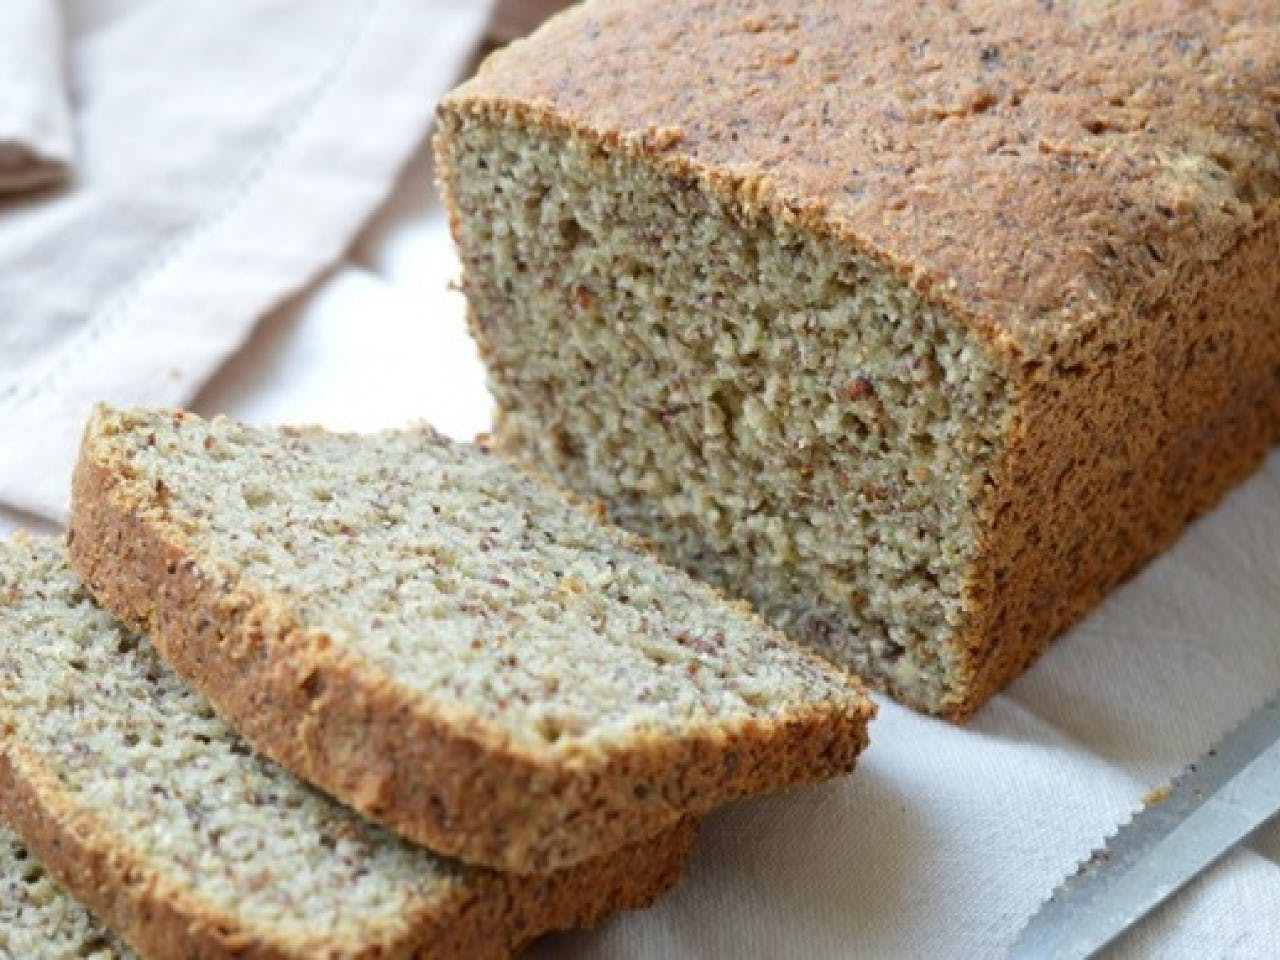 Nut and egg free Paleo bread